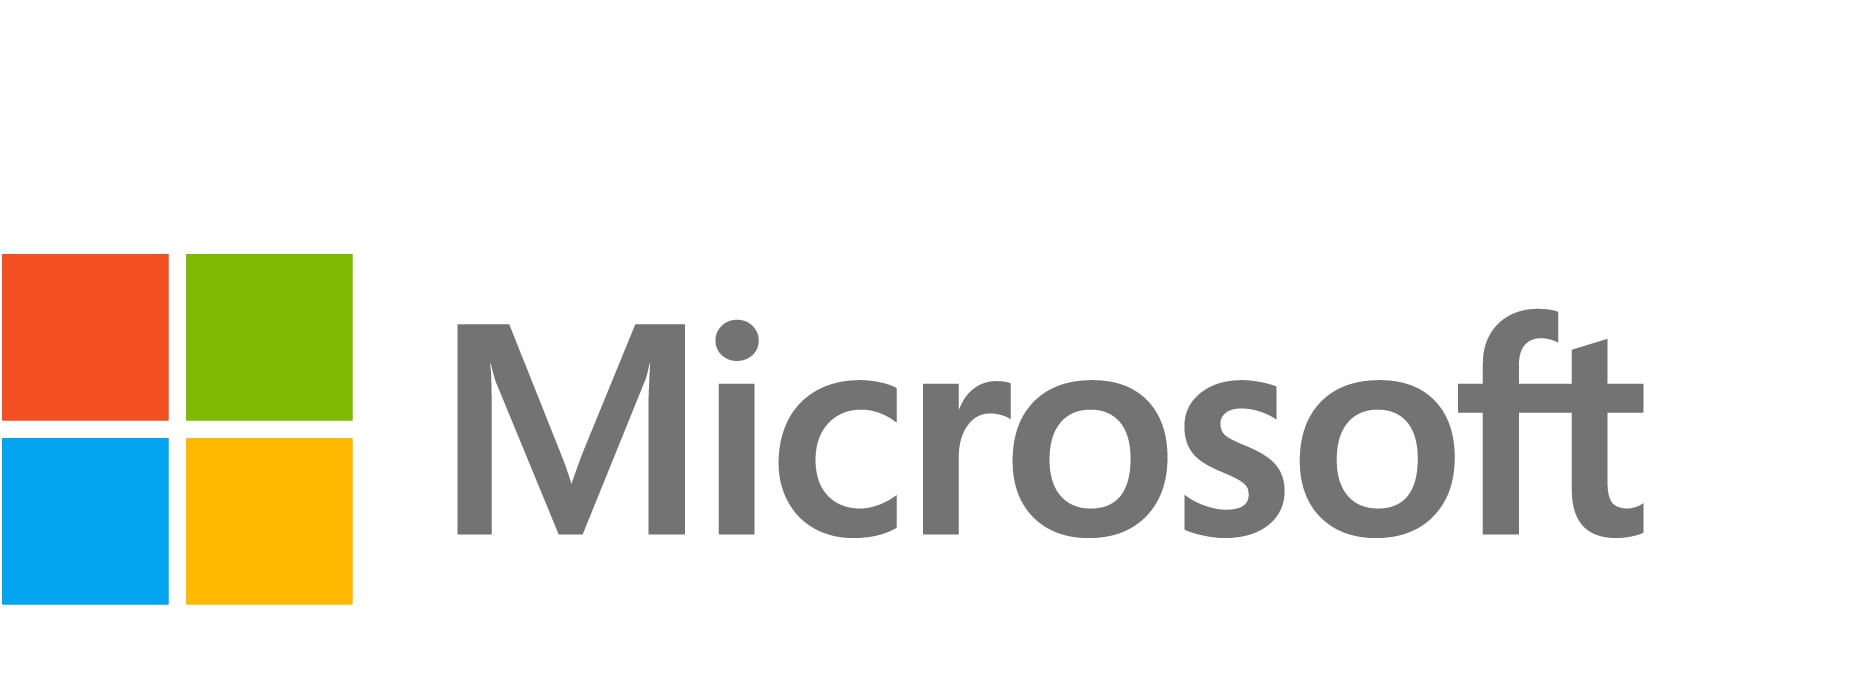 Microsoft Complete for Business with Accidental Damage from Handling - exte